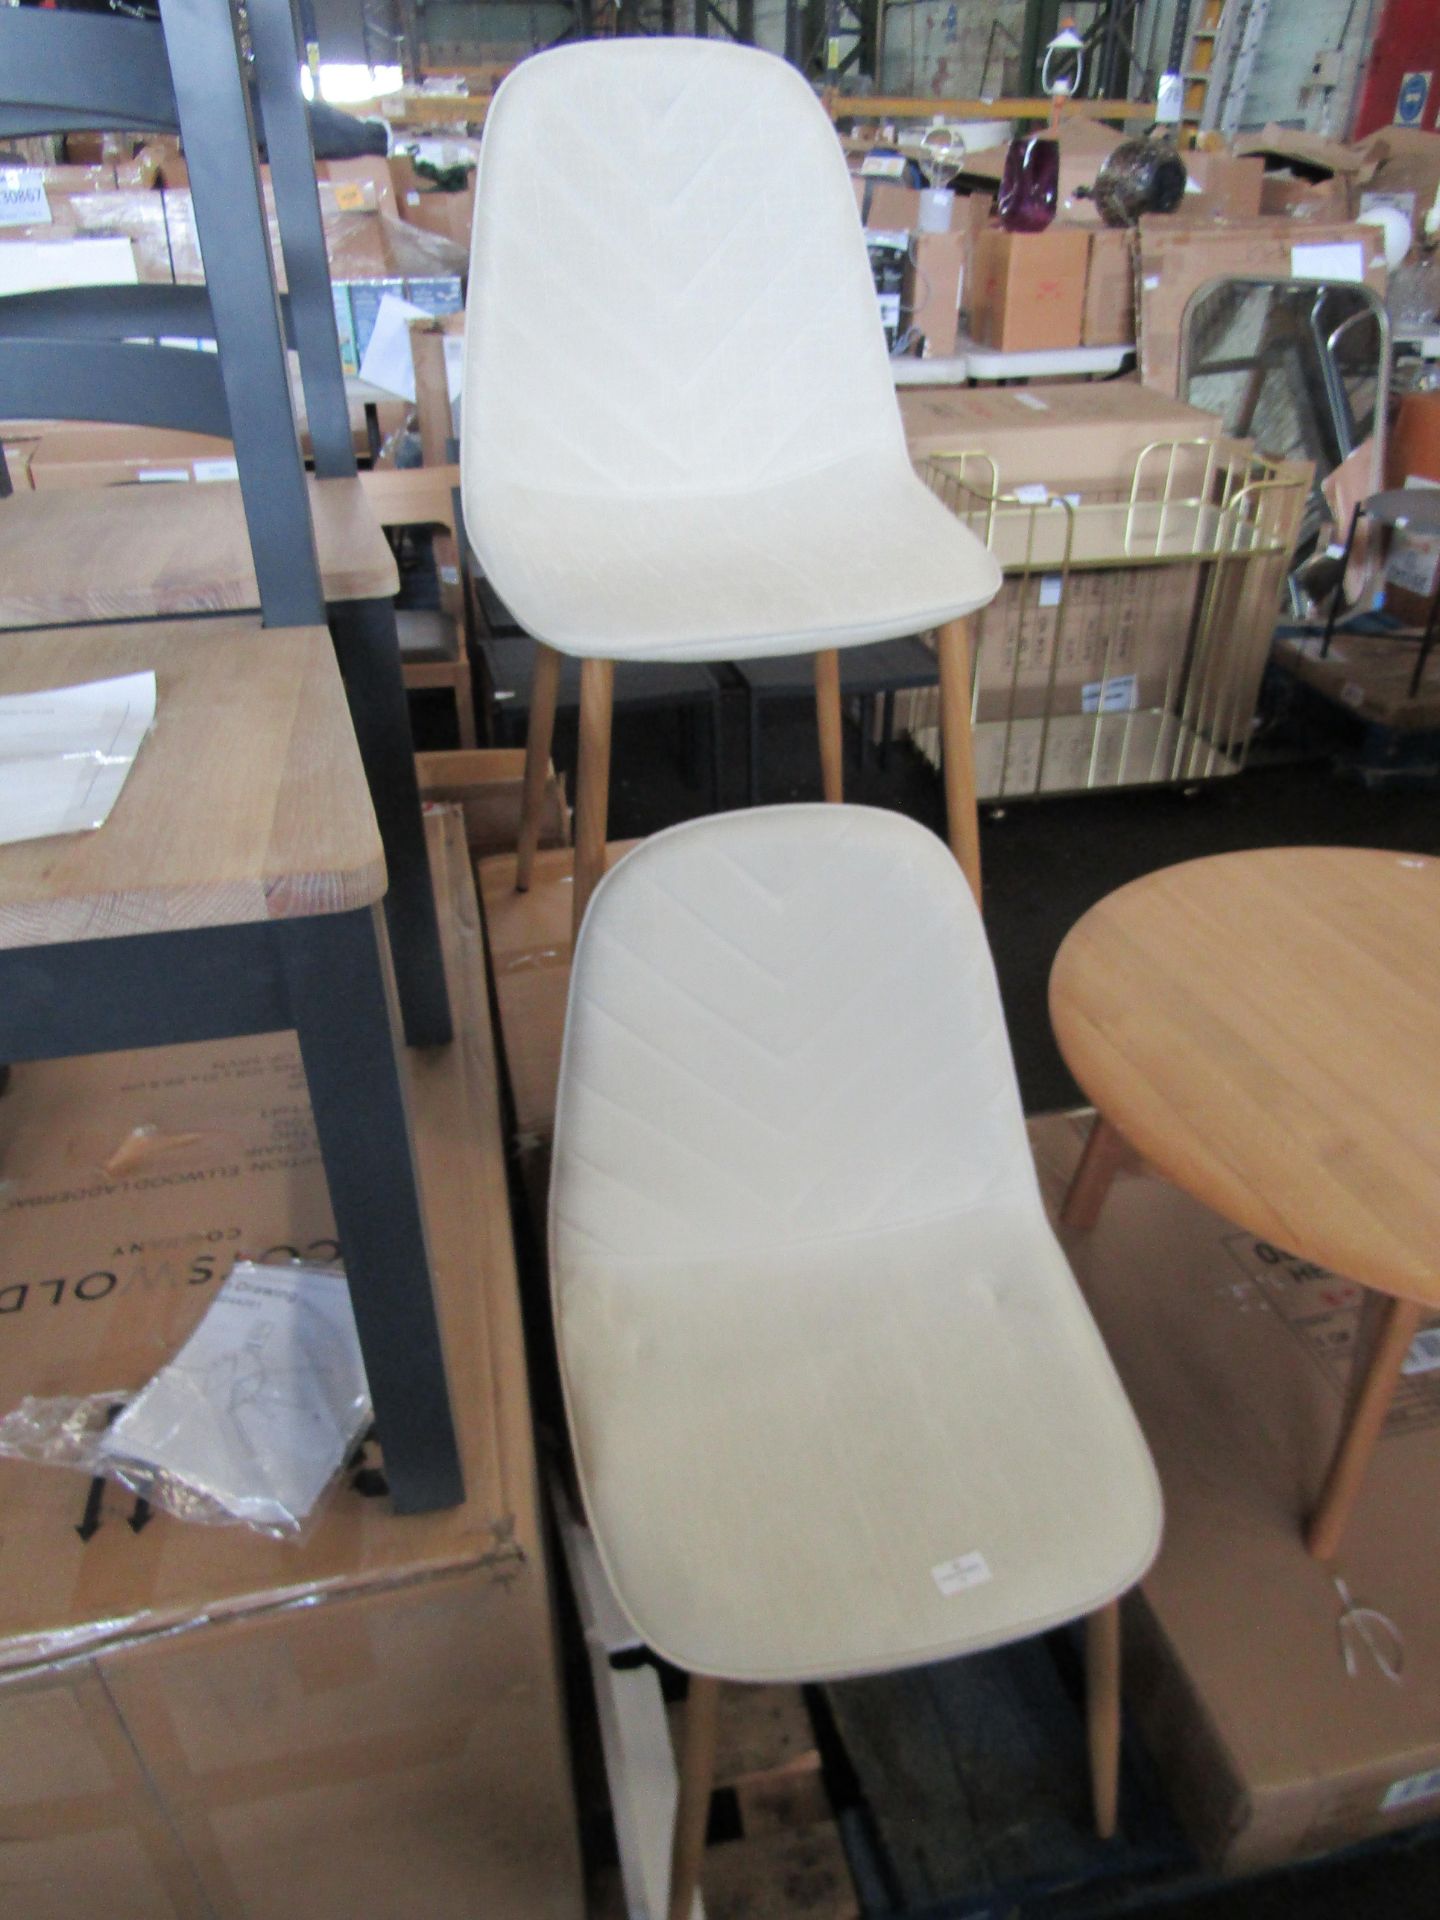 Cotswold Company Modern Upholstered Dining Chair - Cream RRP Â£65.00 - This item looks to be in good